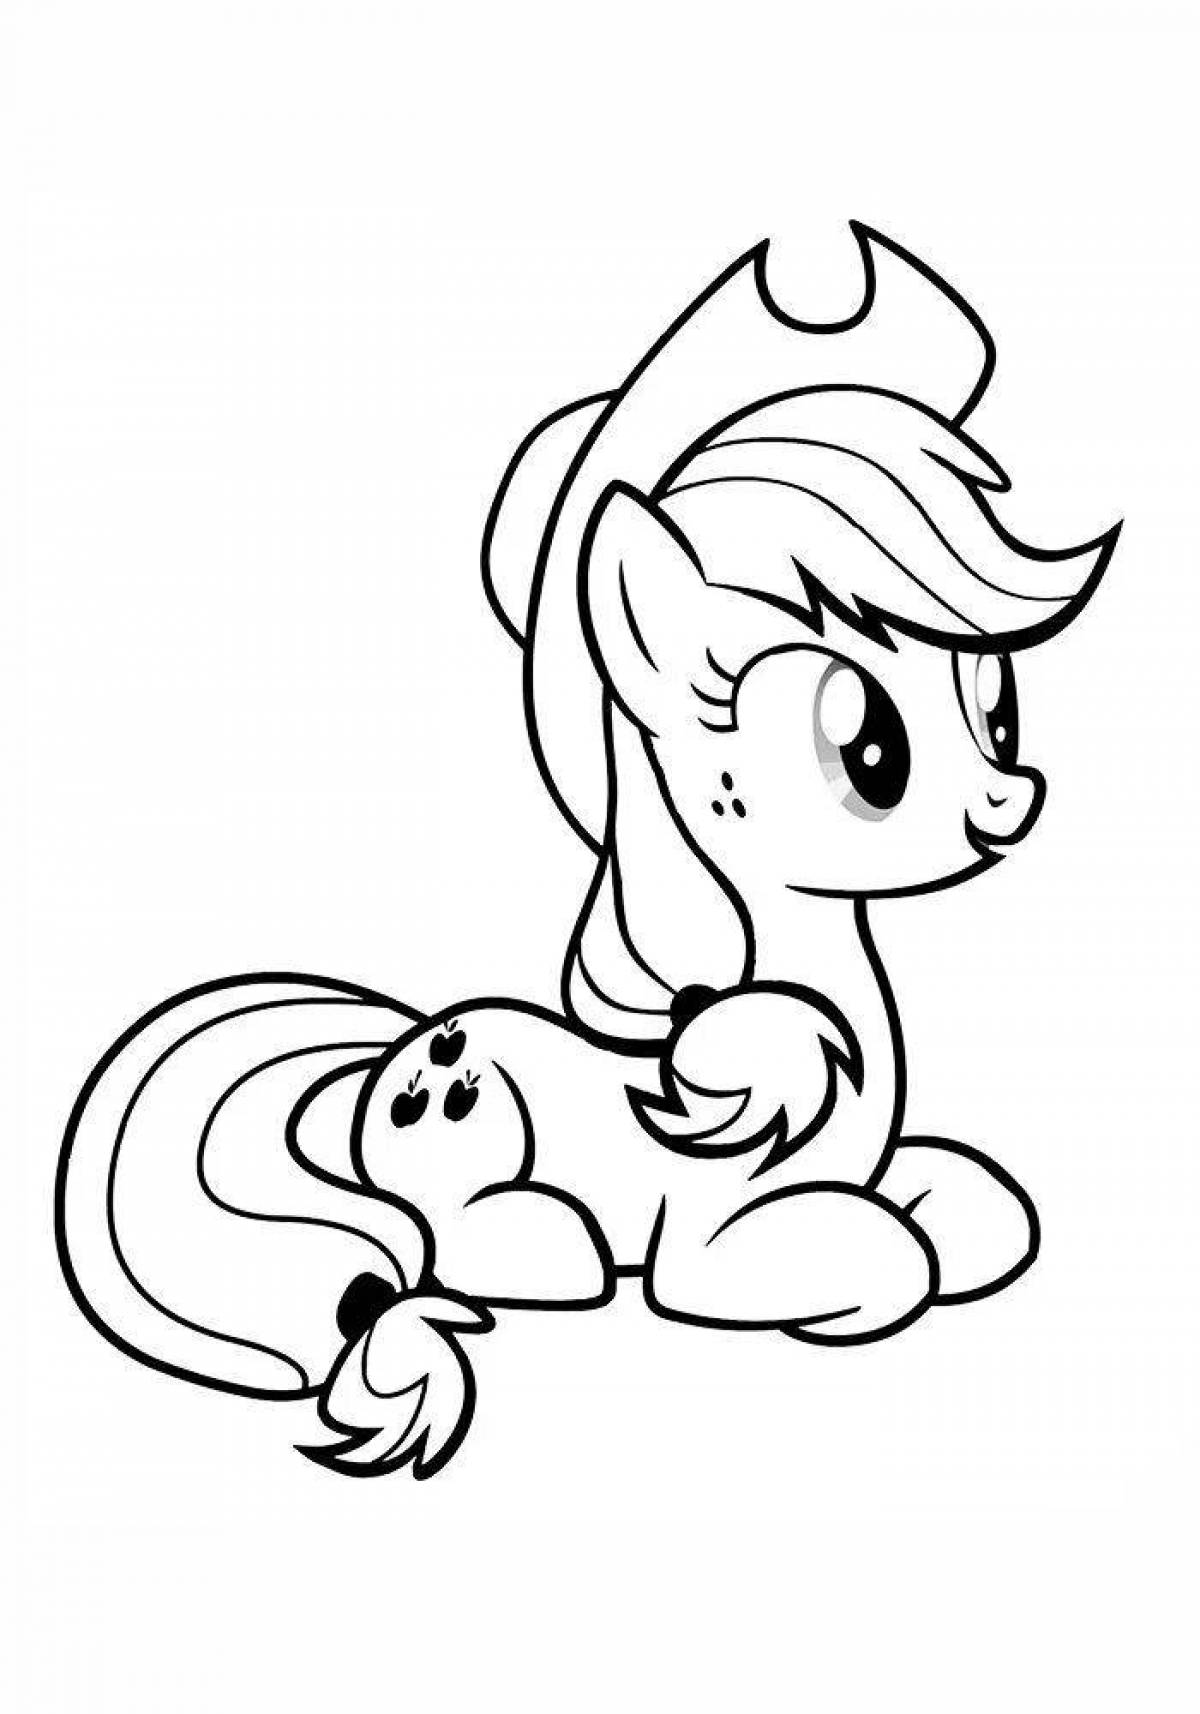 Animated applejack pony coloring page